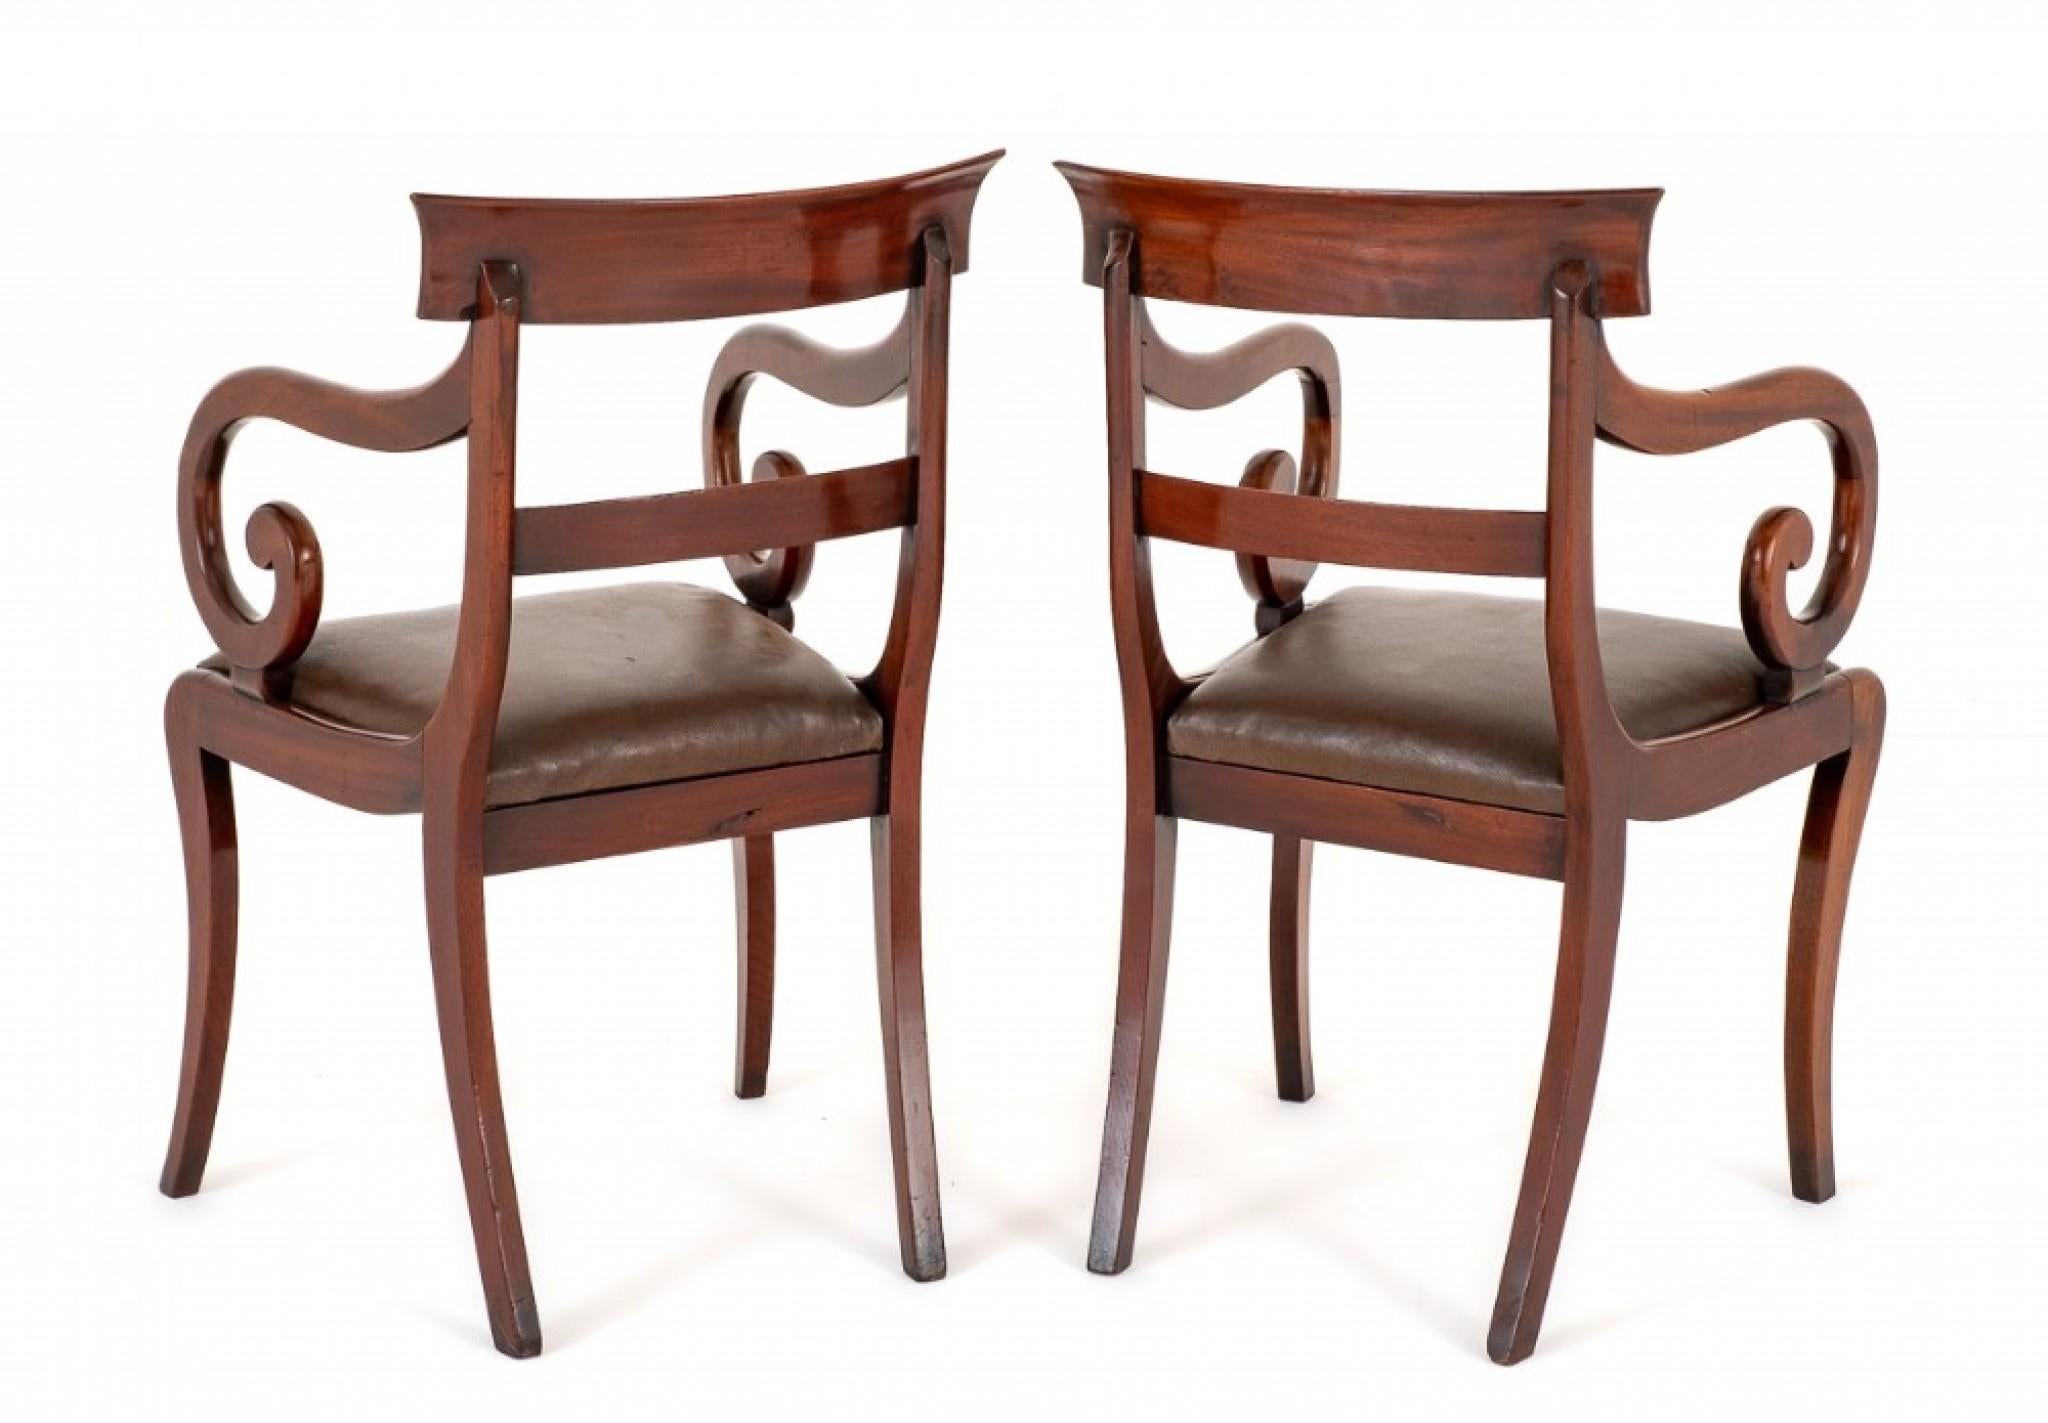 Pair of mahogany regency elbow chairs.
Regency period
these chairs are raised upon sabre front legs with shaped back legs.
Having lift out seats.
The chairs feature typical shaped regency arms.
The shaped top rail being of a plain form and a